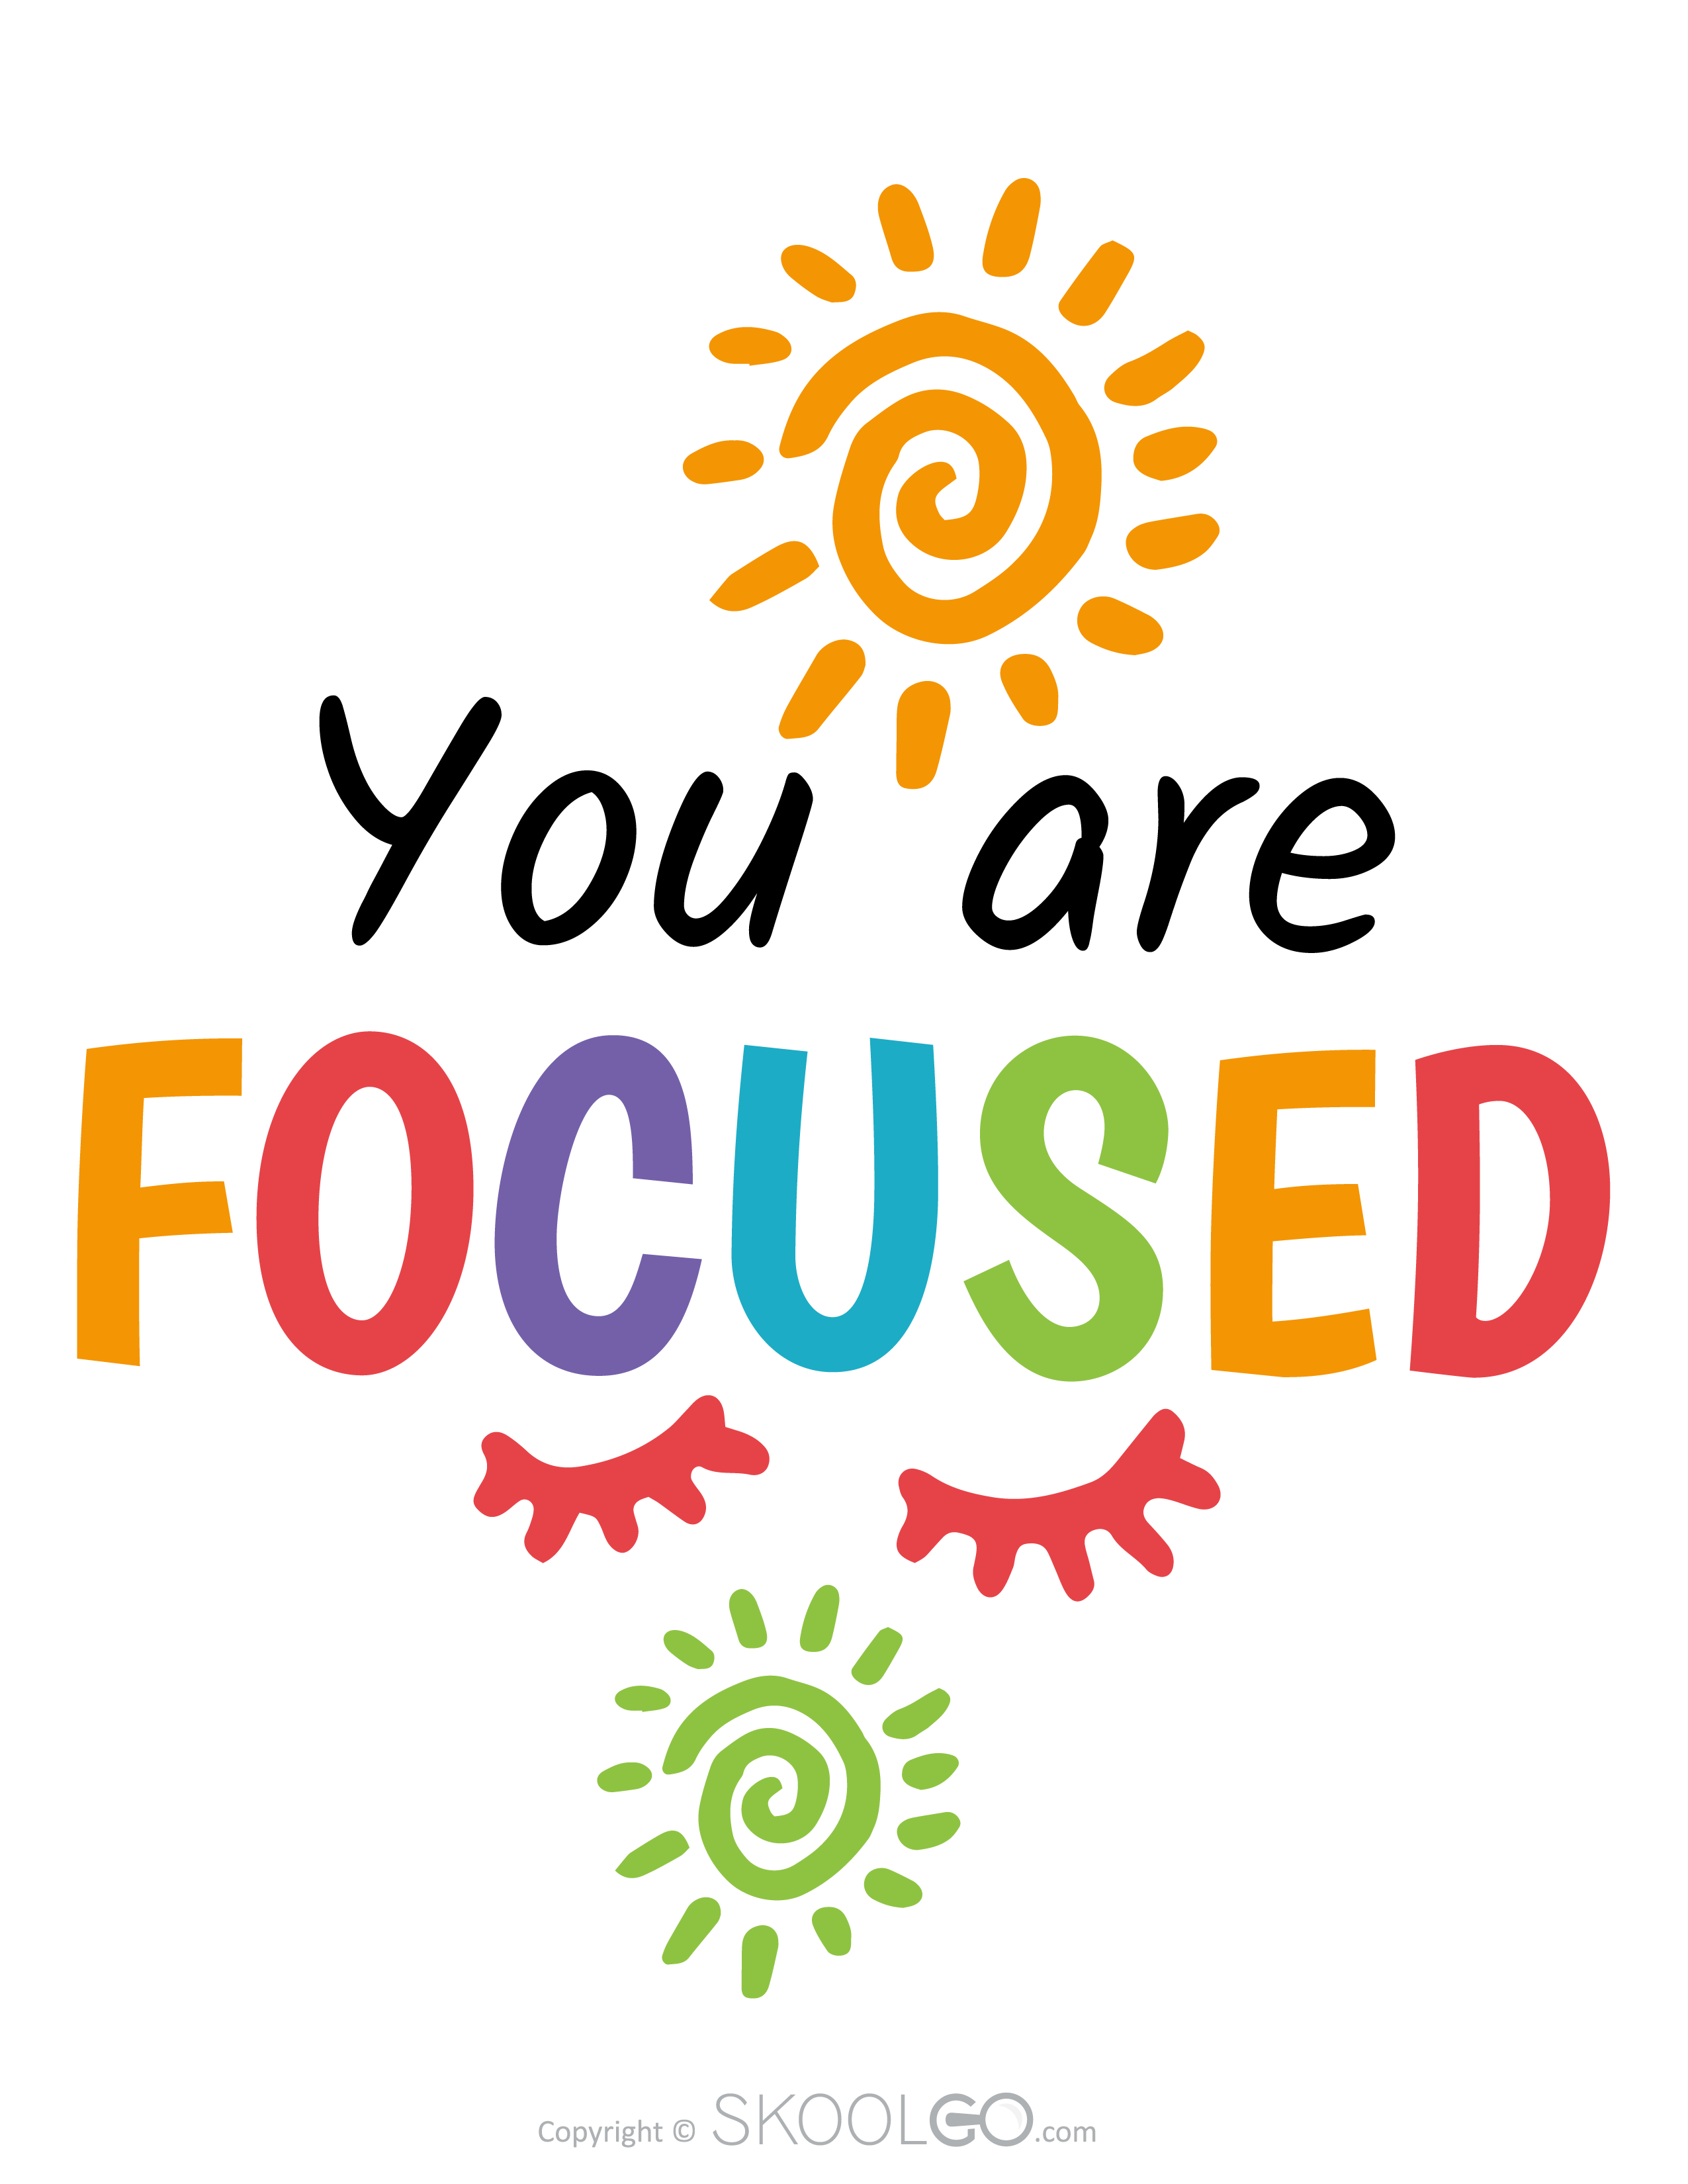 You Are Focused - Free Poster